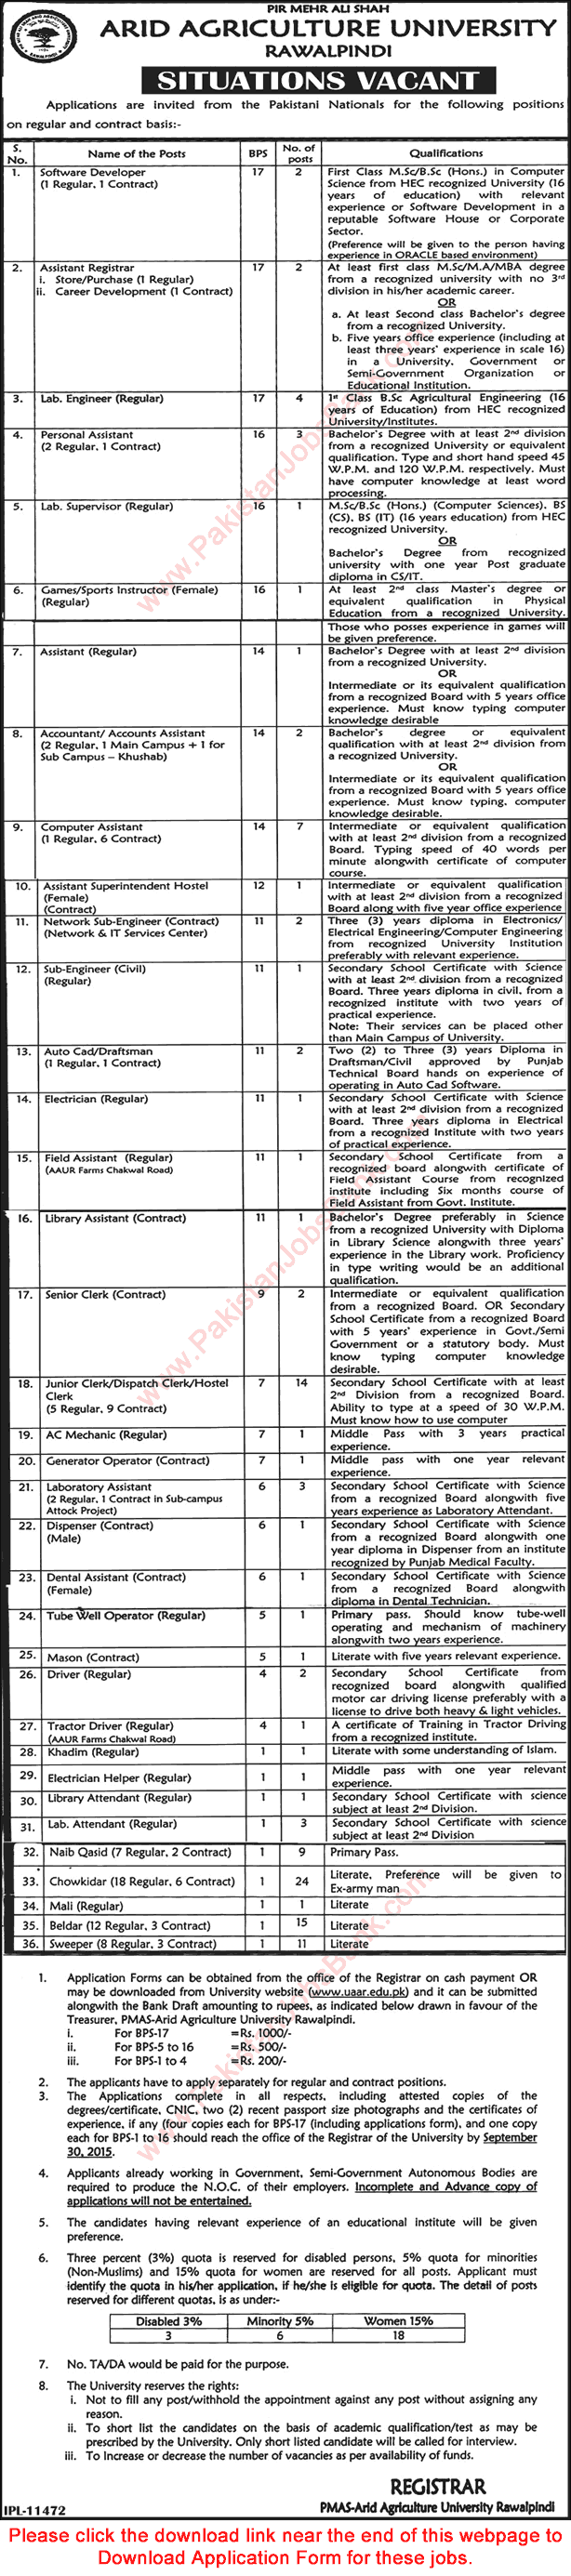 Arid Agriculture University Rawalpindi Jobs 2015 August / September Application Form Download Latest